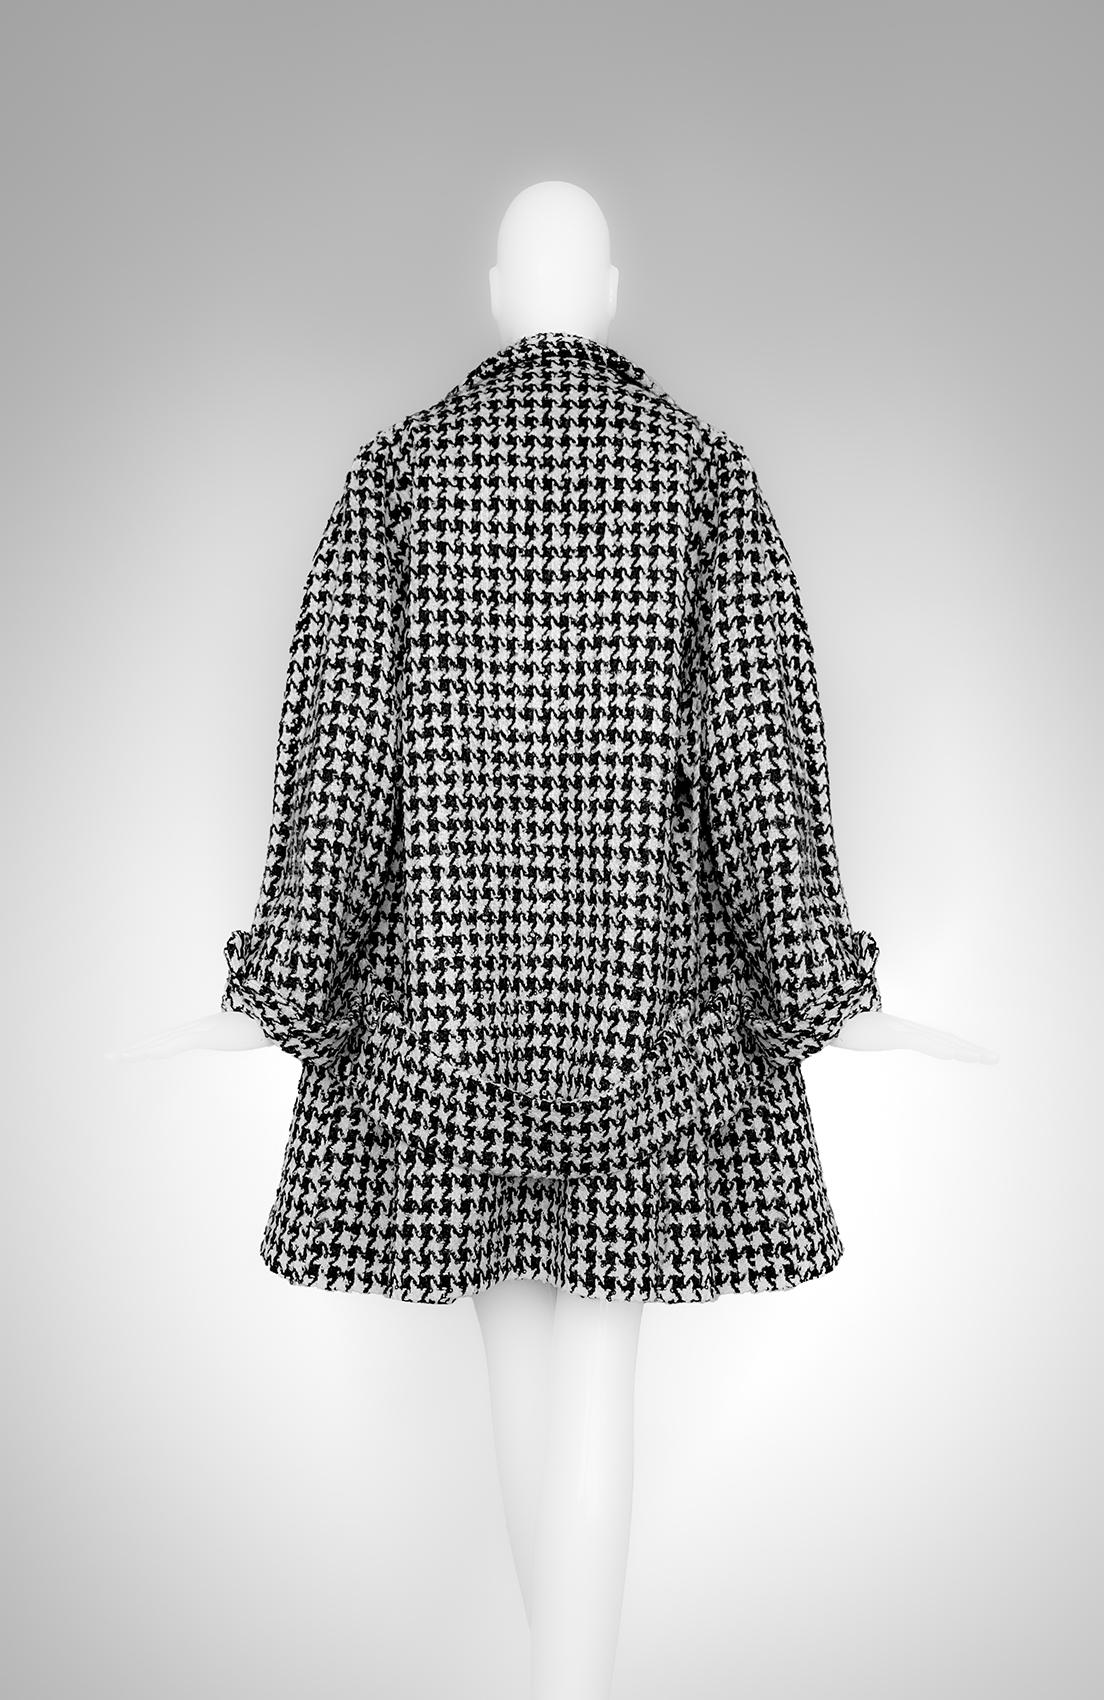 Rare Iconic Thierry Mugler Archival FW1995 Coat Houndstooth Jacket For Sale 2